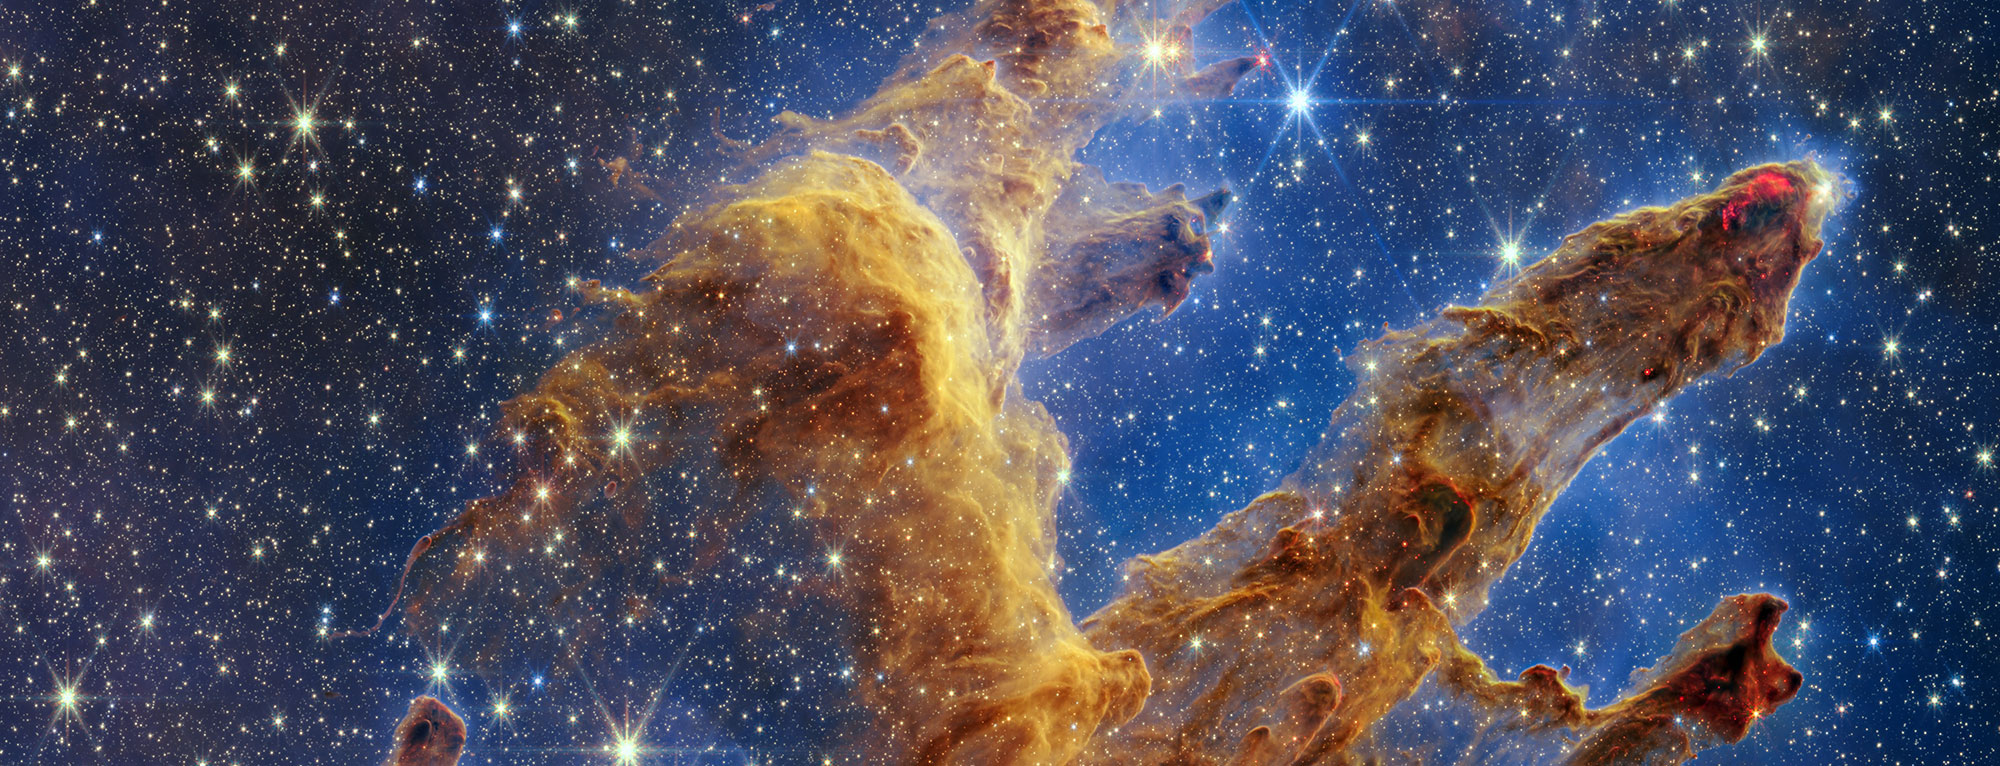 stars and clouds of gas in space